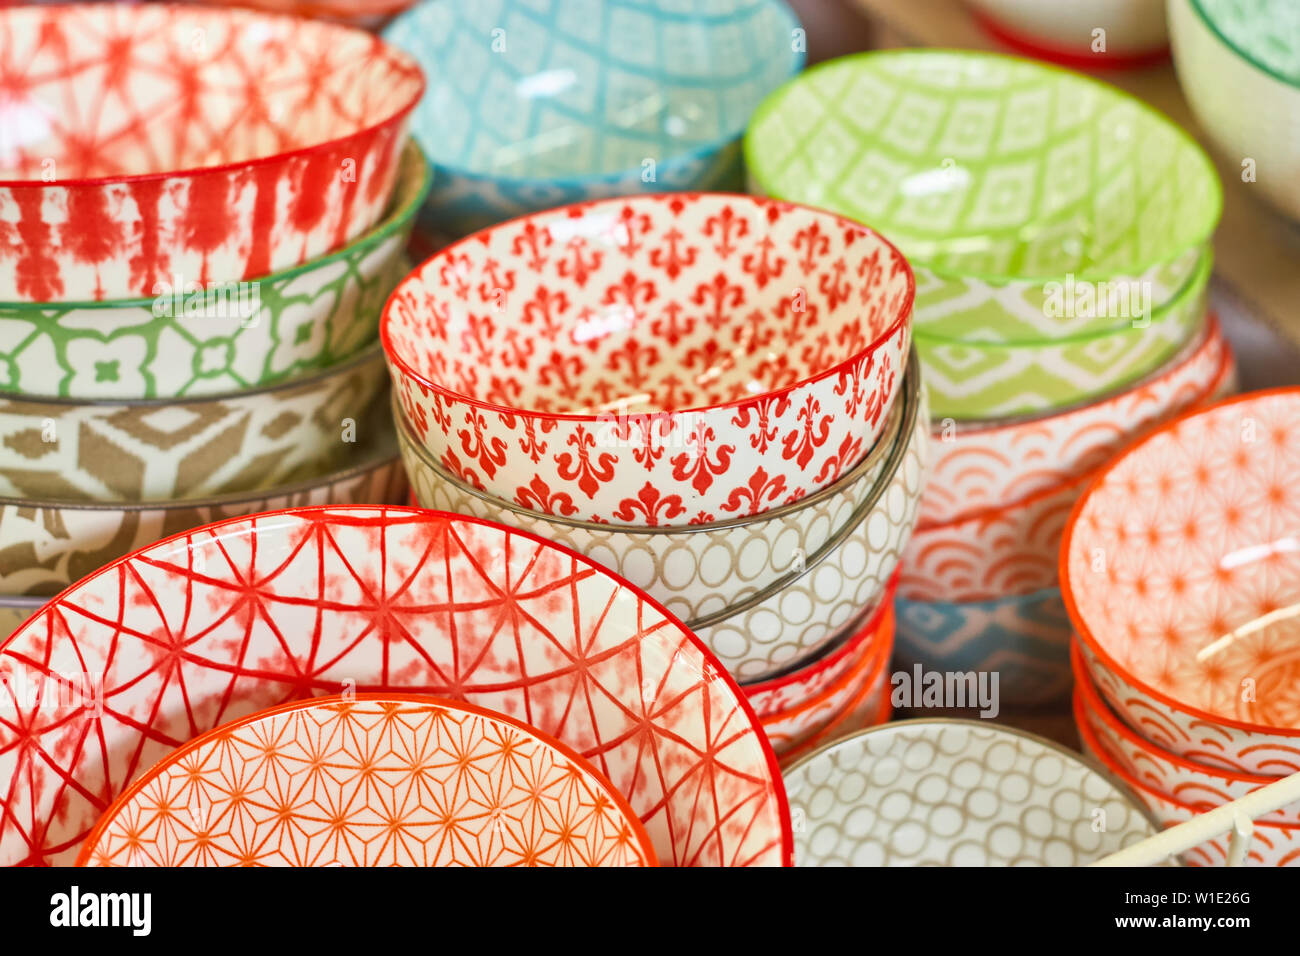 Group of ceramic bowls in the store. Dishes with different colorful patterns. Stock Photo